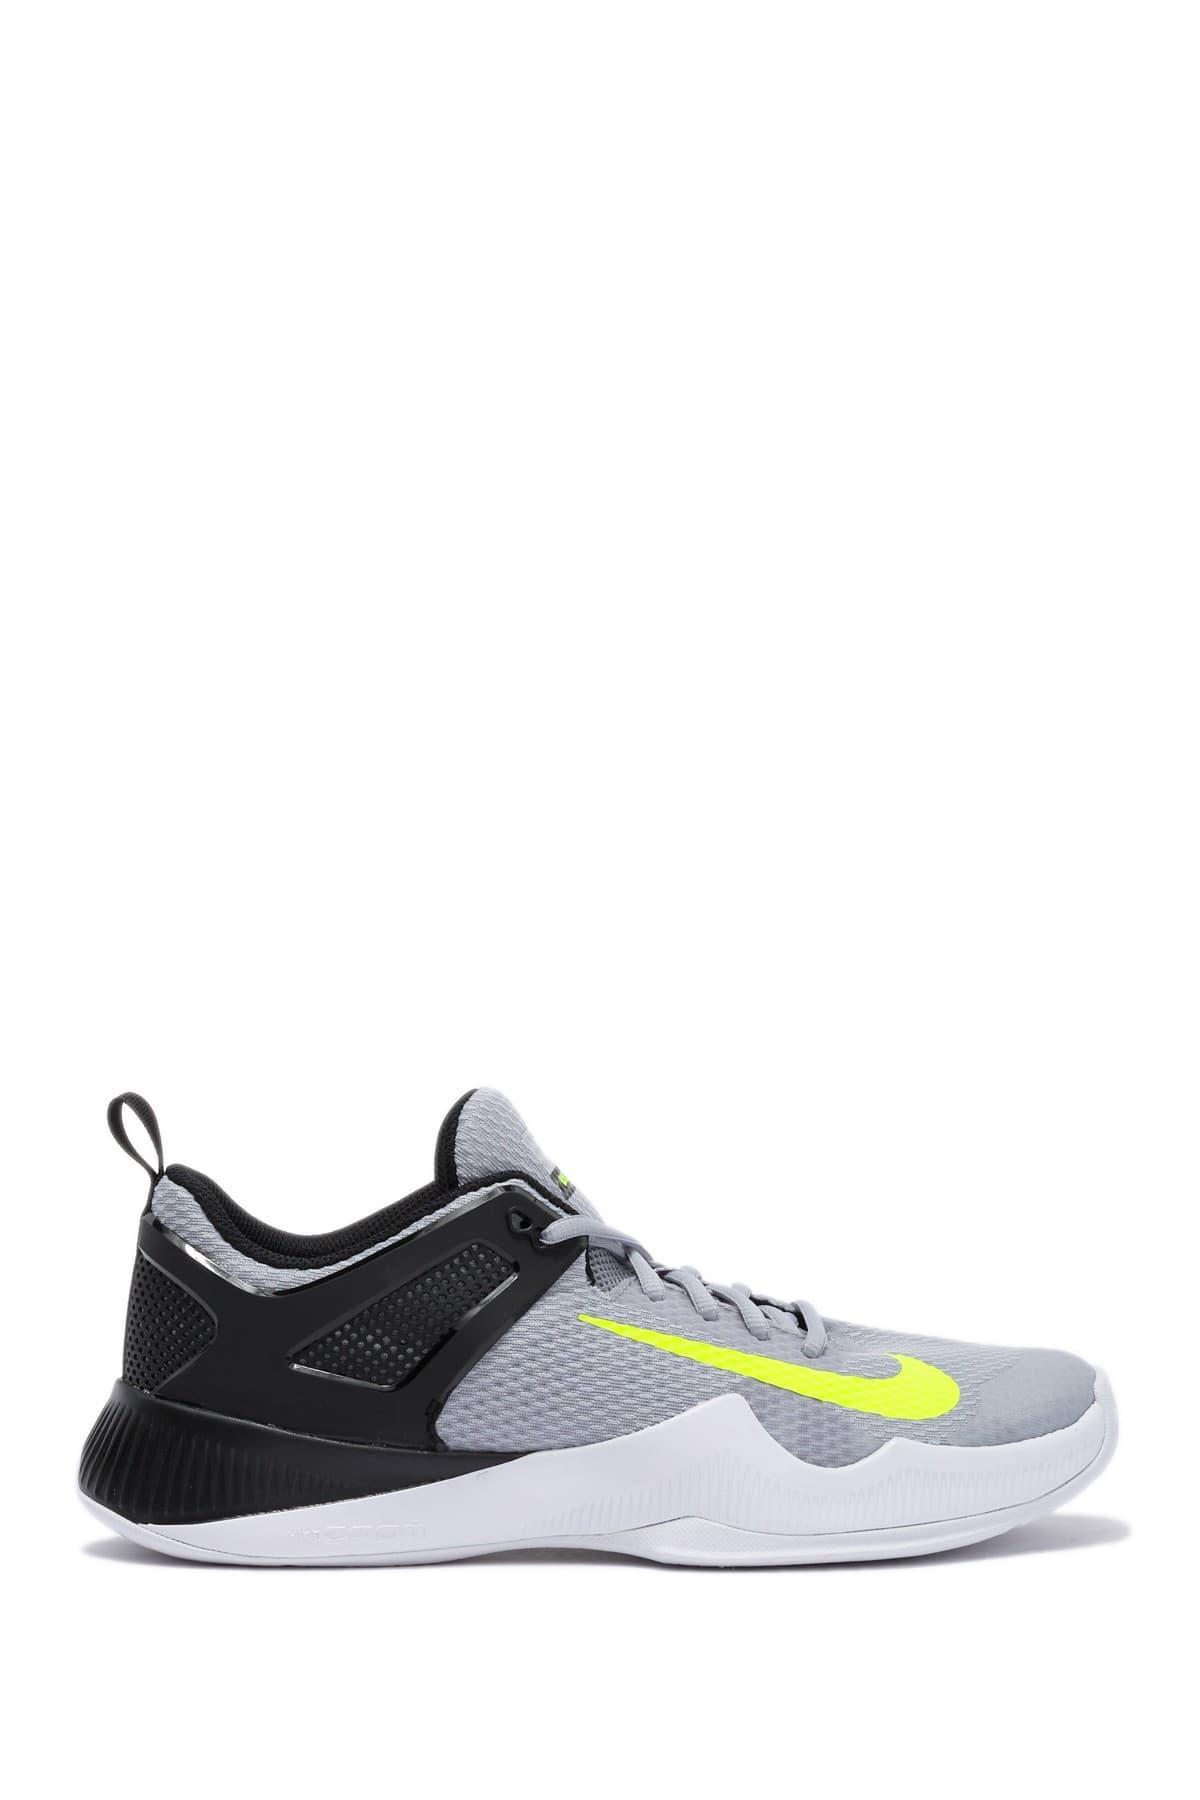 Nike Zoom Hyperattack Volleyball Shoe Gray | Lyst